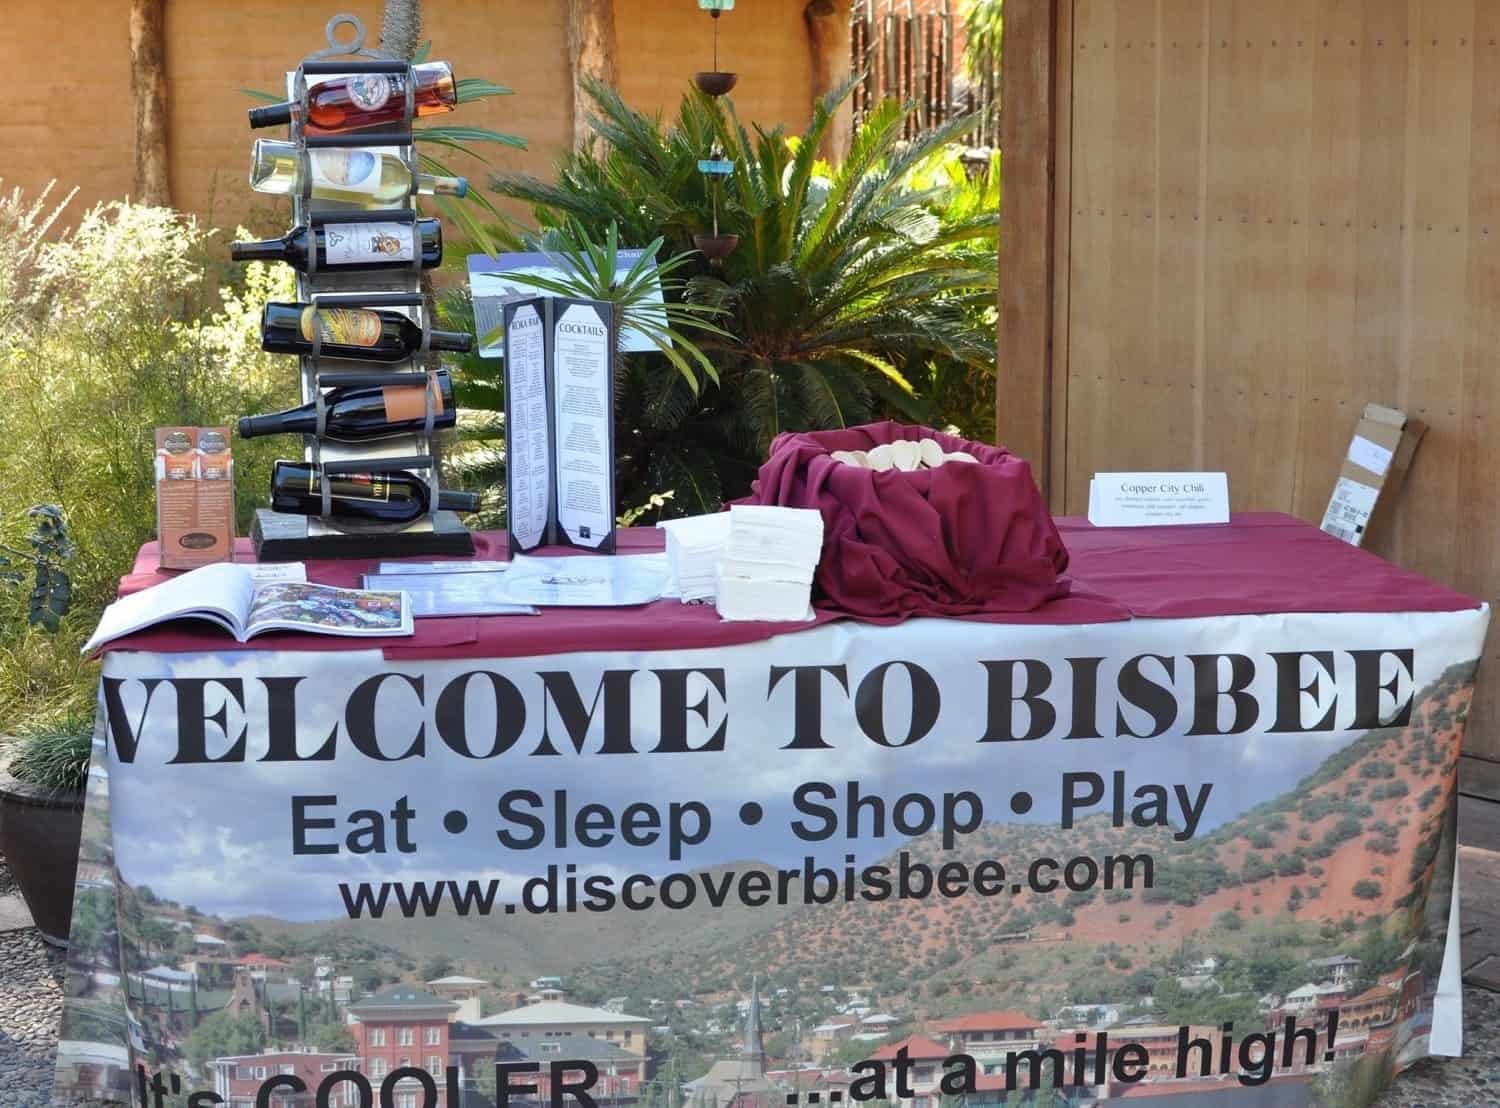 Welcome to Bisbee at Savor Food & Wine Festival